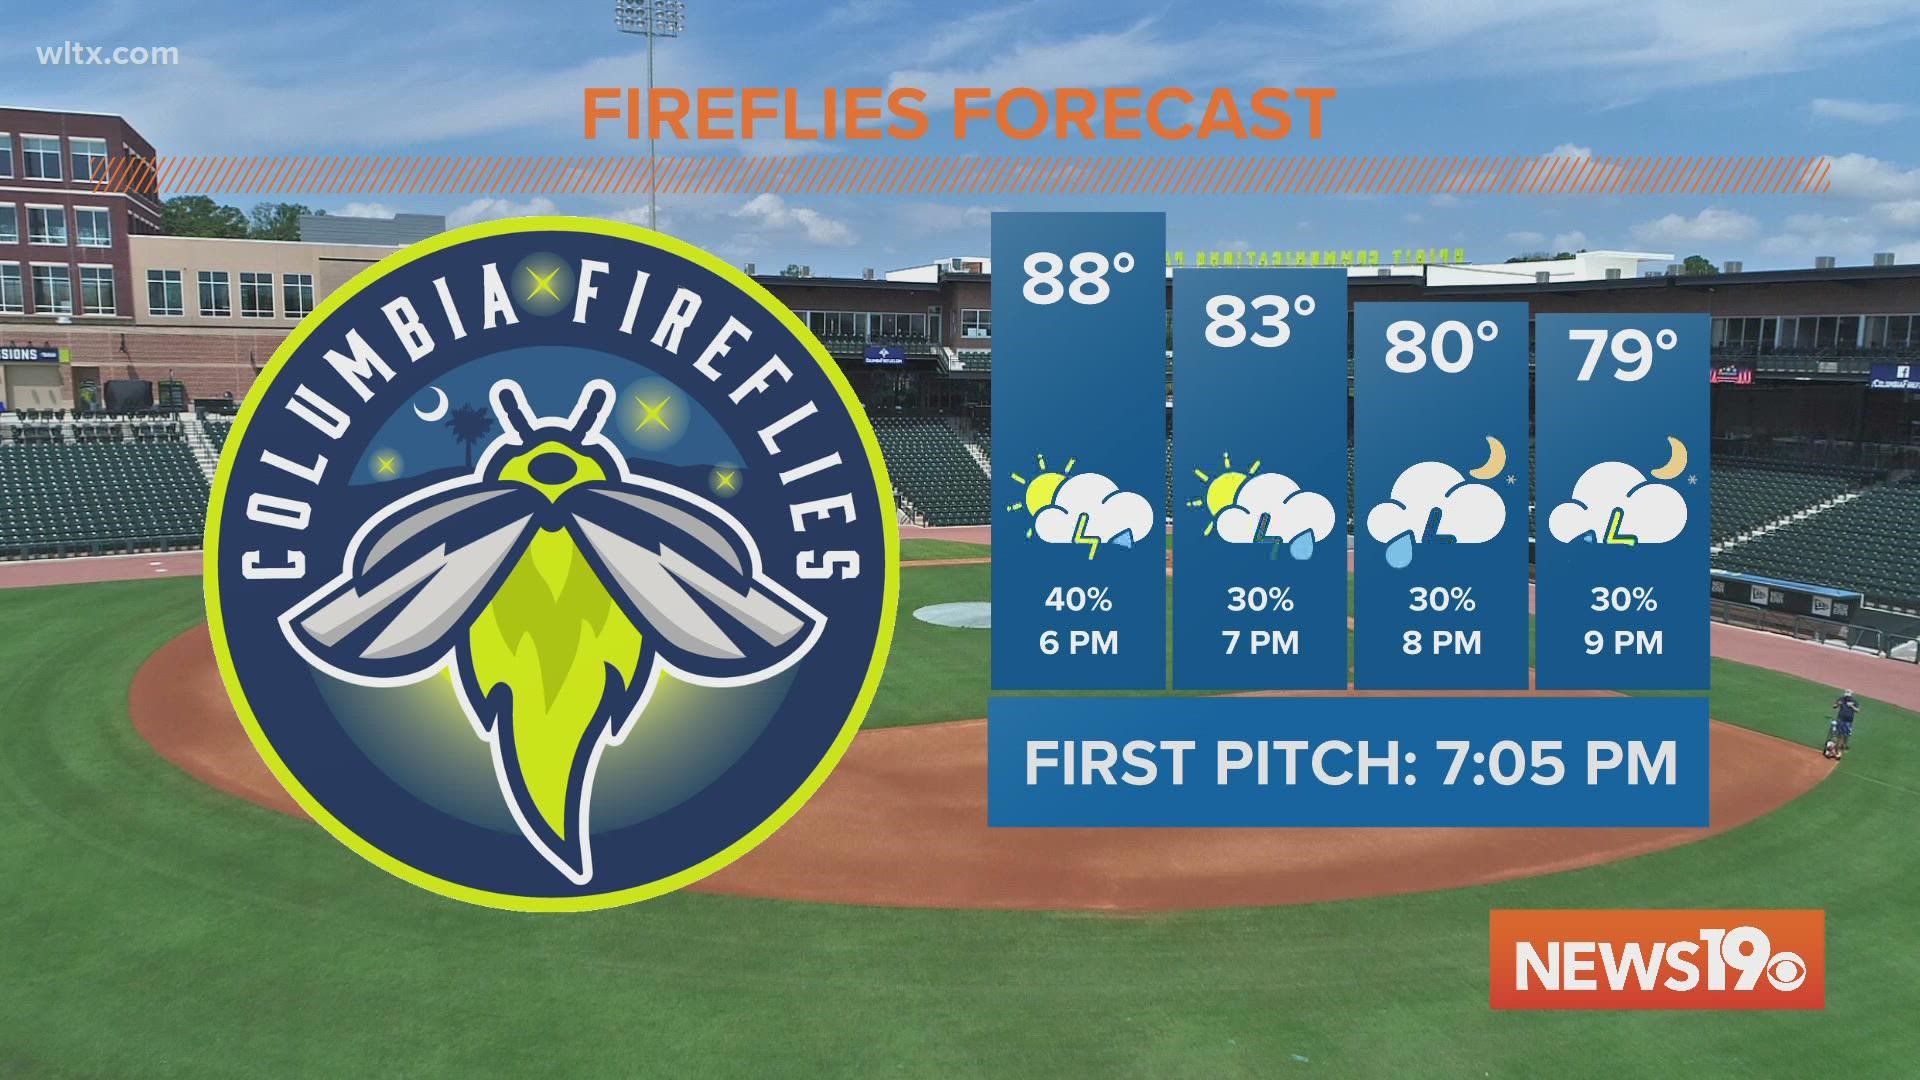 Meteorologist Cory Smith has the Columbia Fireflies forecast for September 7, 2022.